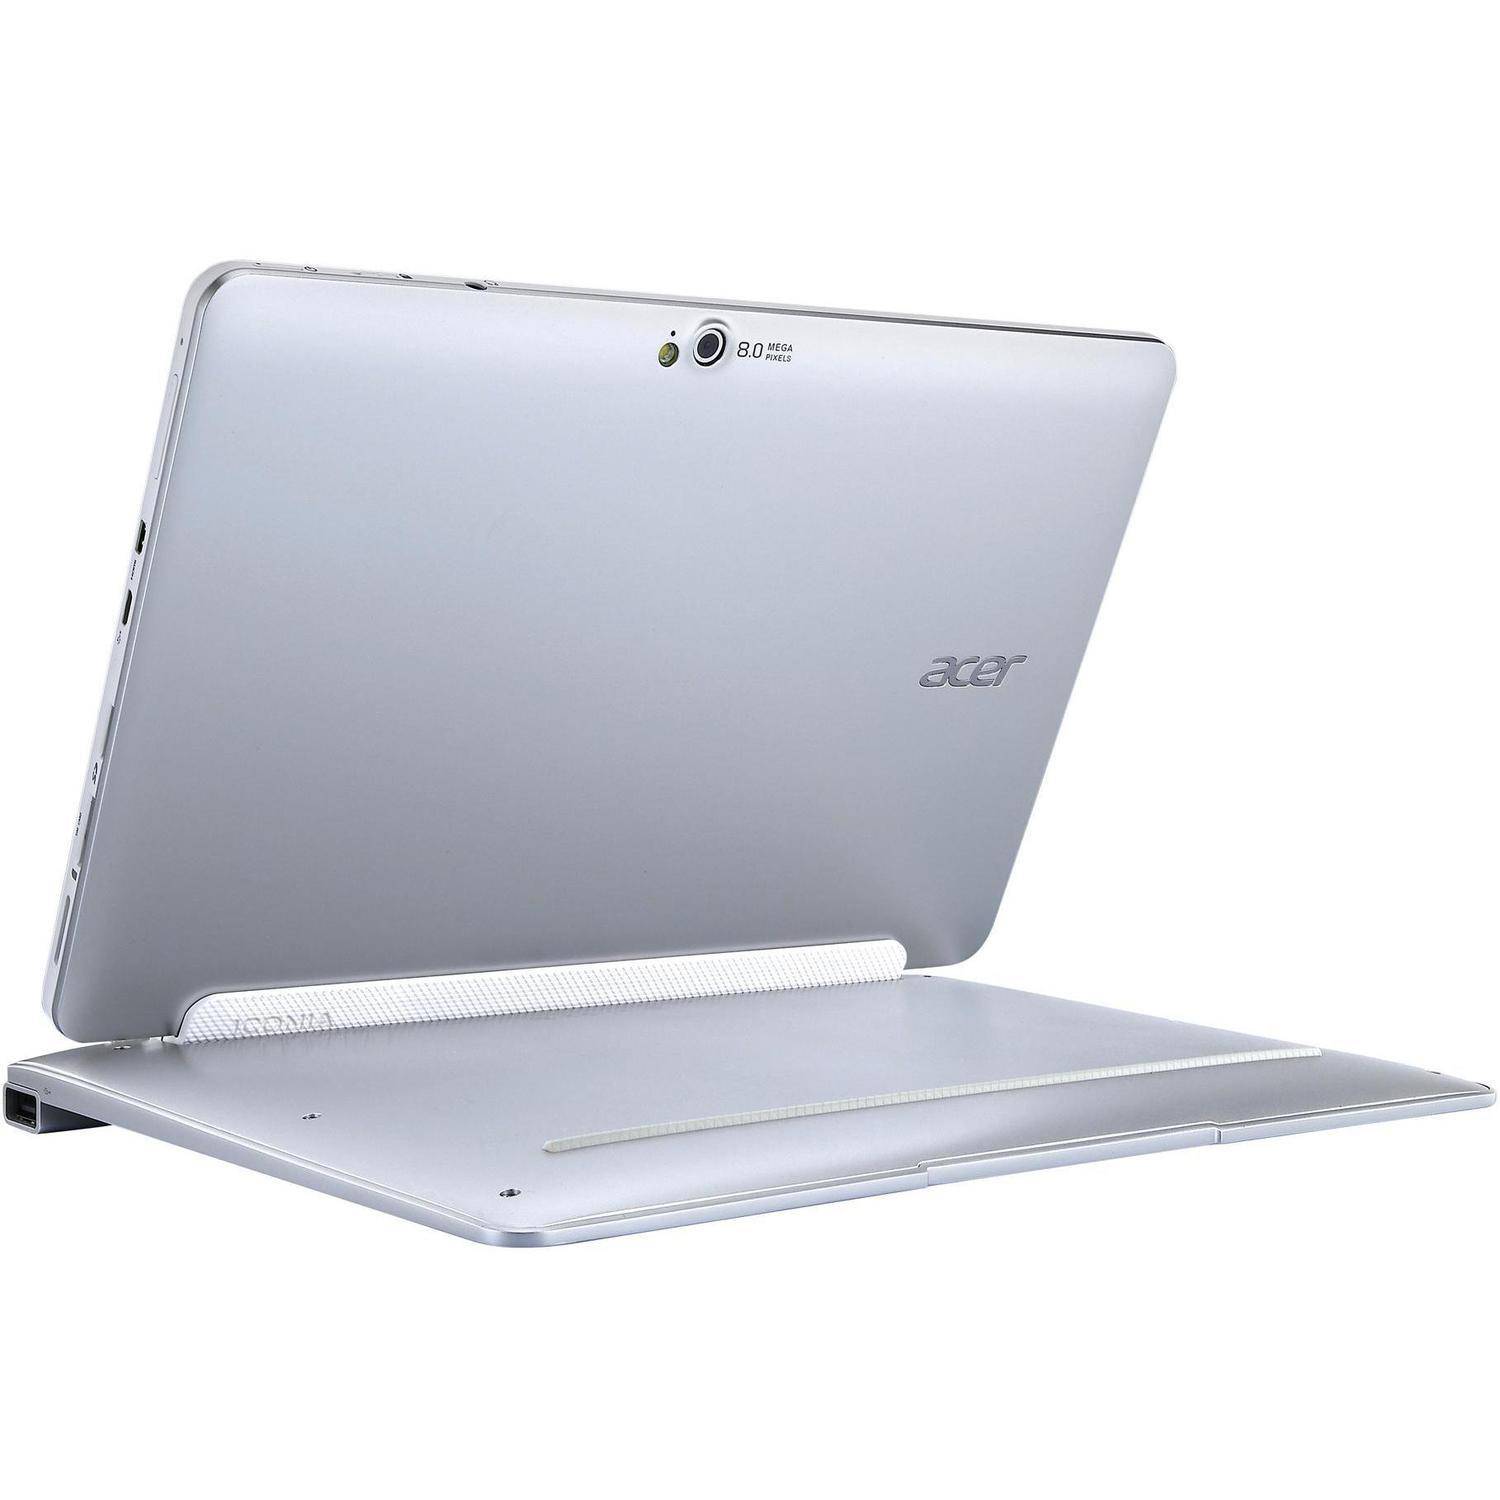 Acer White 10.1" ICONIA W510-1849 2-in-1 Convertible PC with Intel Atom Dual-Core Z2760 Processor, 2GB Memory, 32GB Hard Drive and Windows 8 - image 3 of 9